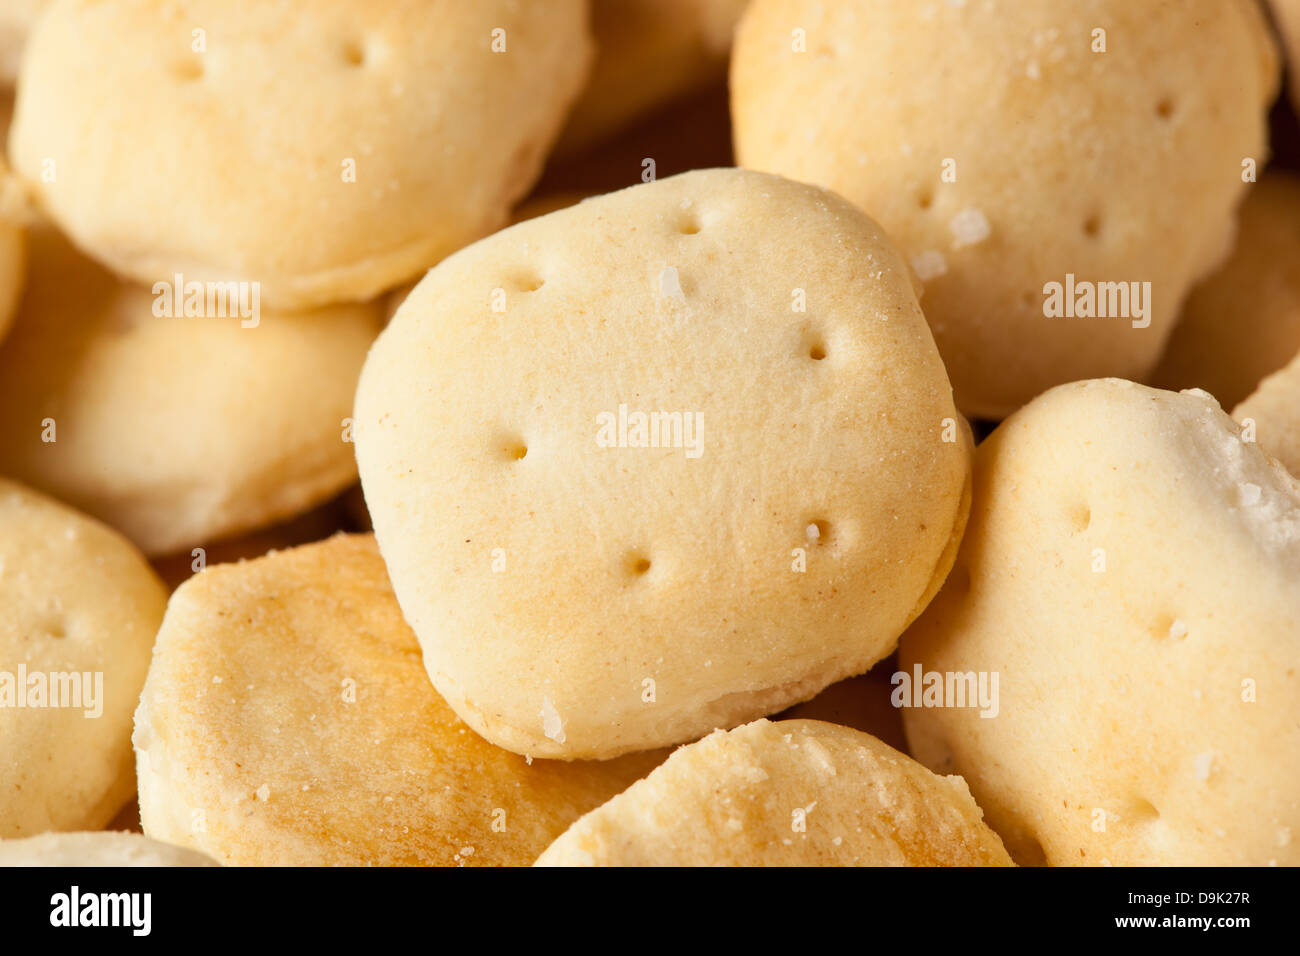 Organic Crunchy Oyster Crackers made with whole wheat Stock Photo